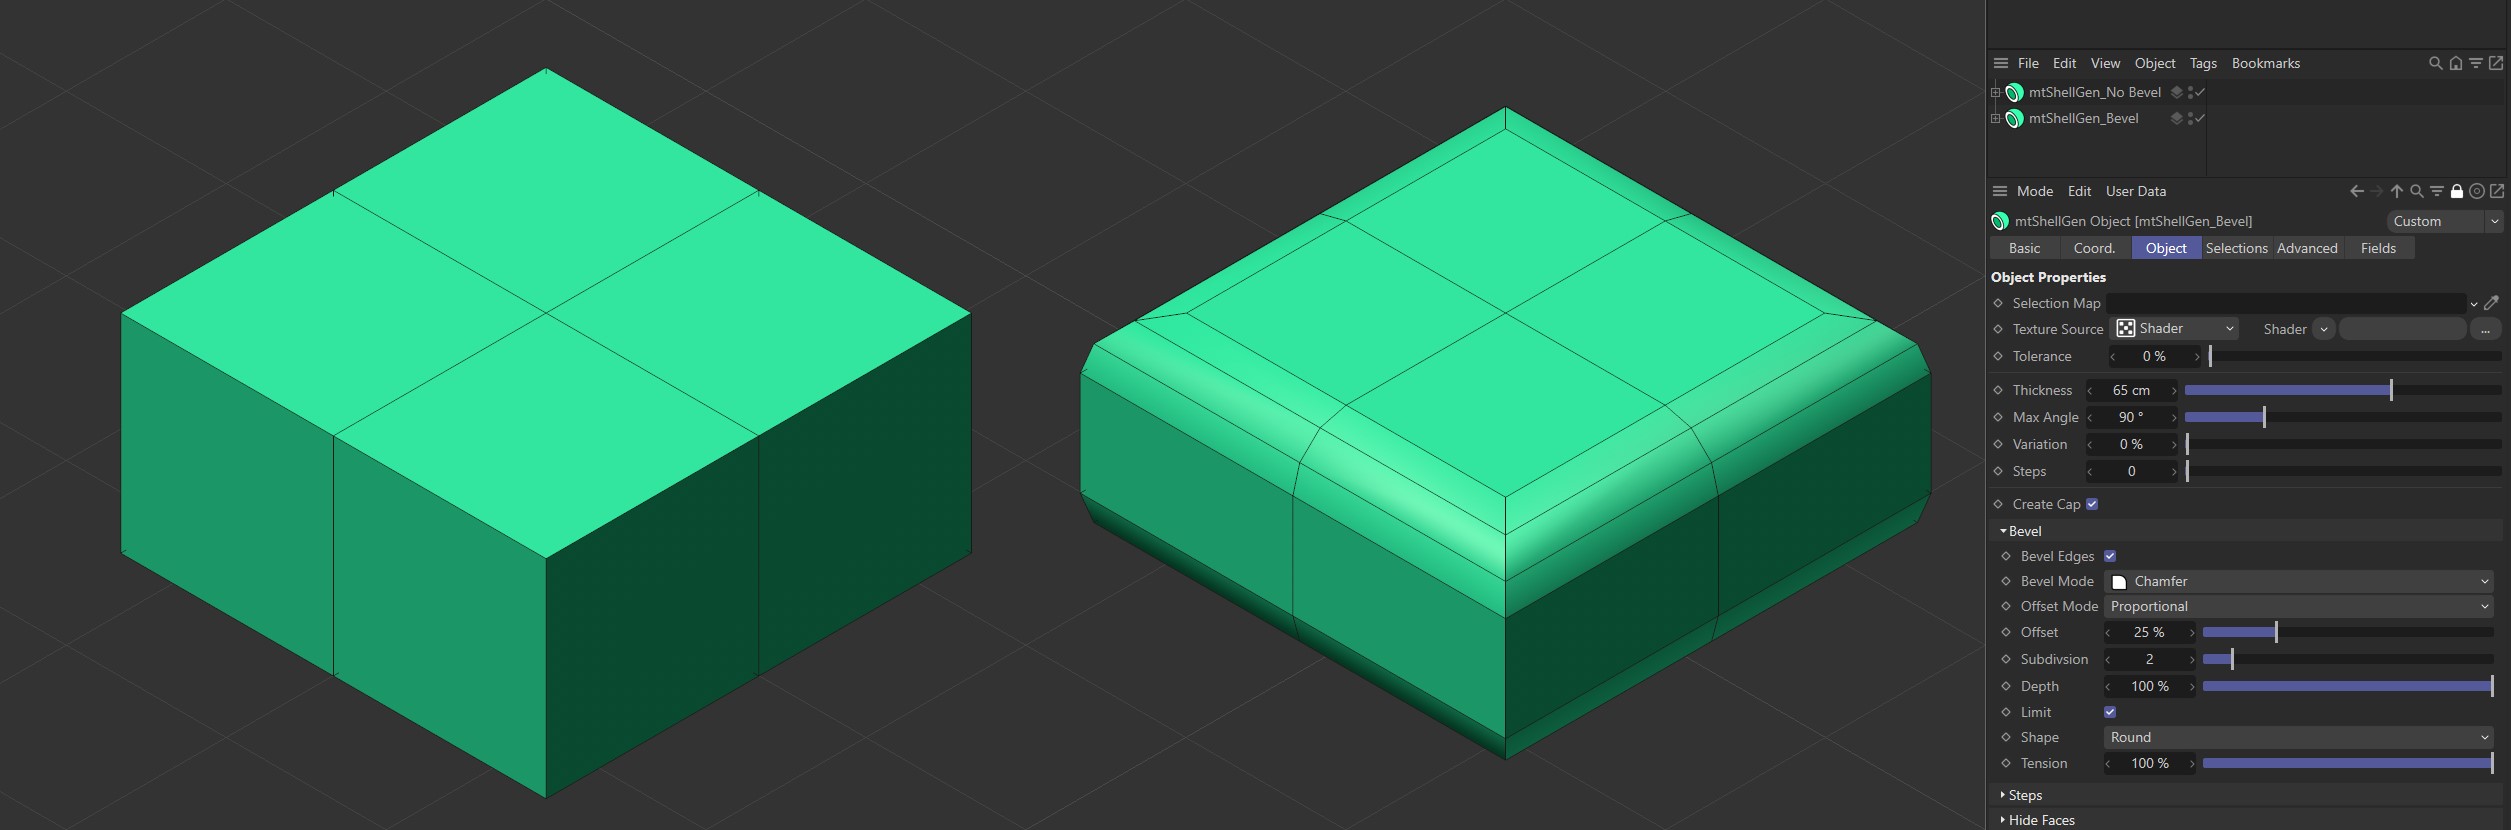 The Bevel Edges option in the left mtShellGen is disabled. It is enabled on the right, resulting in beveled edges.